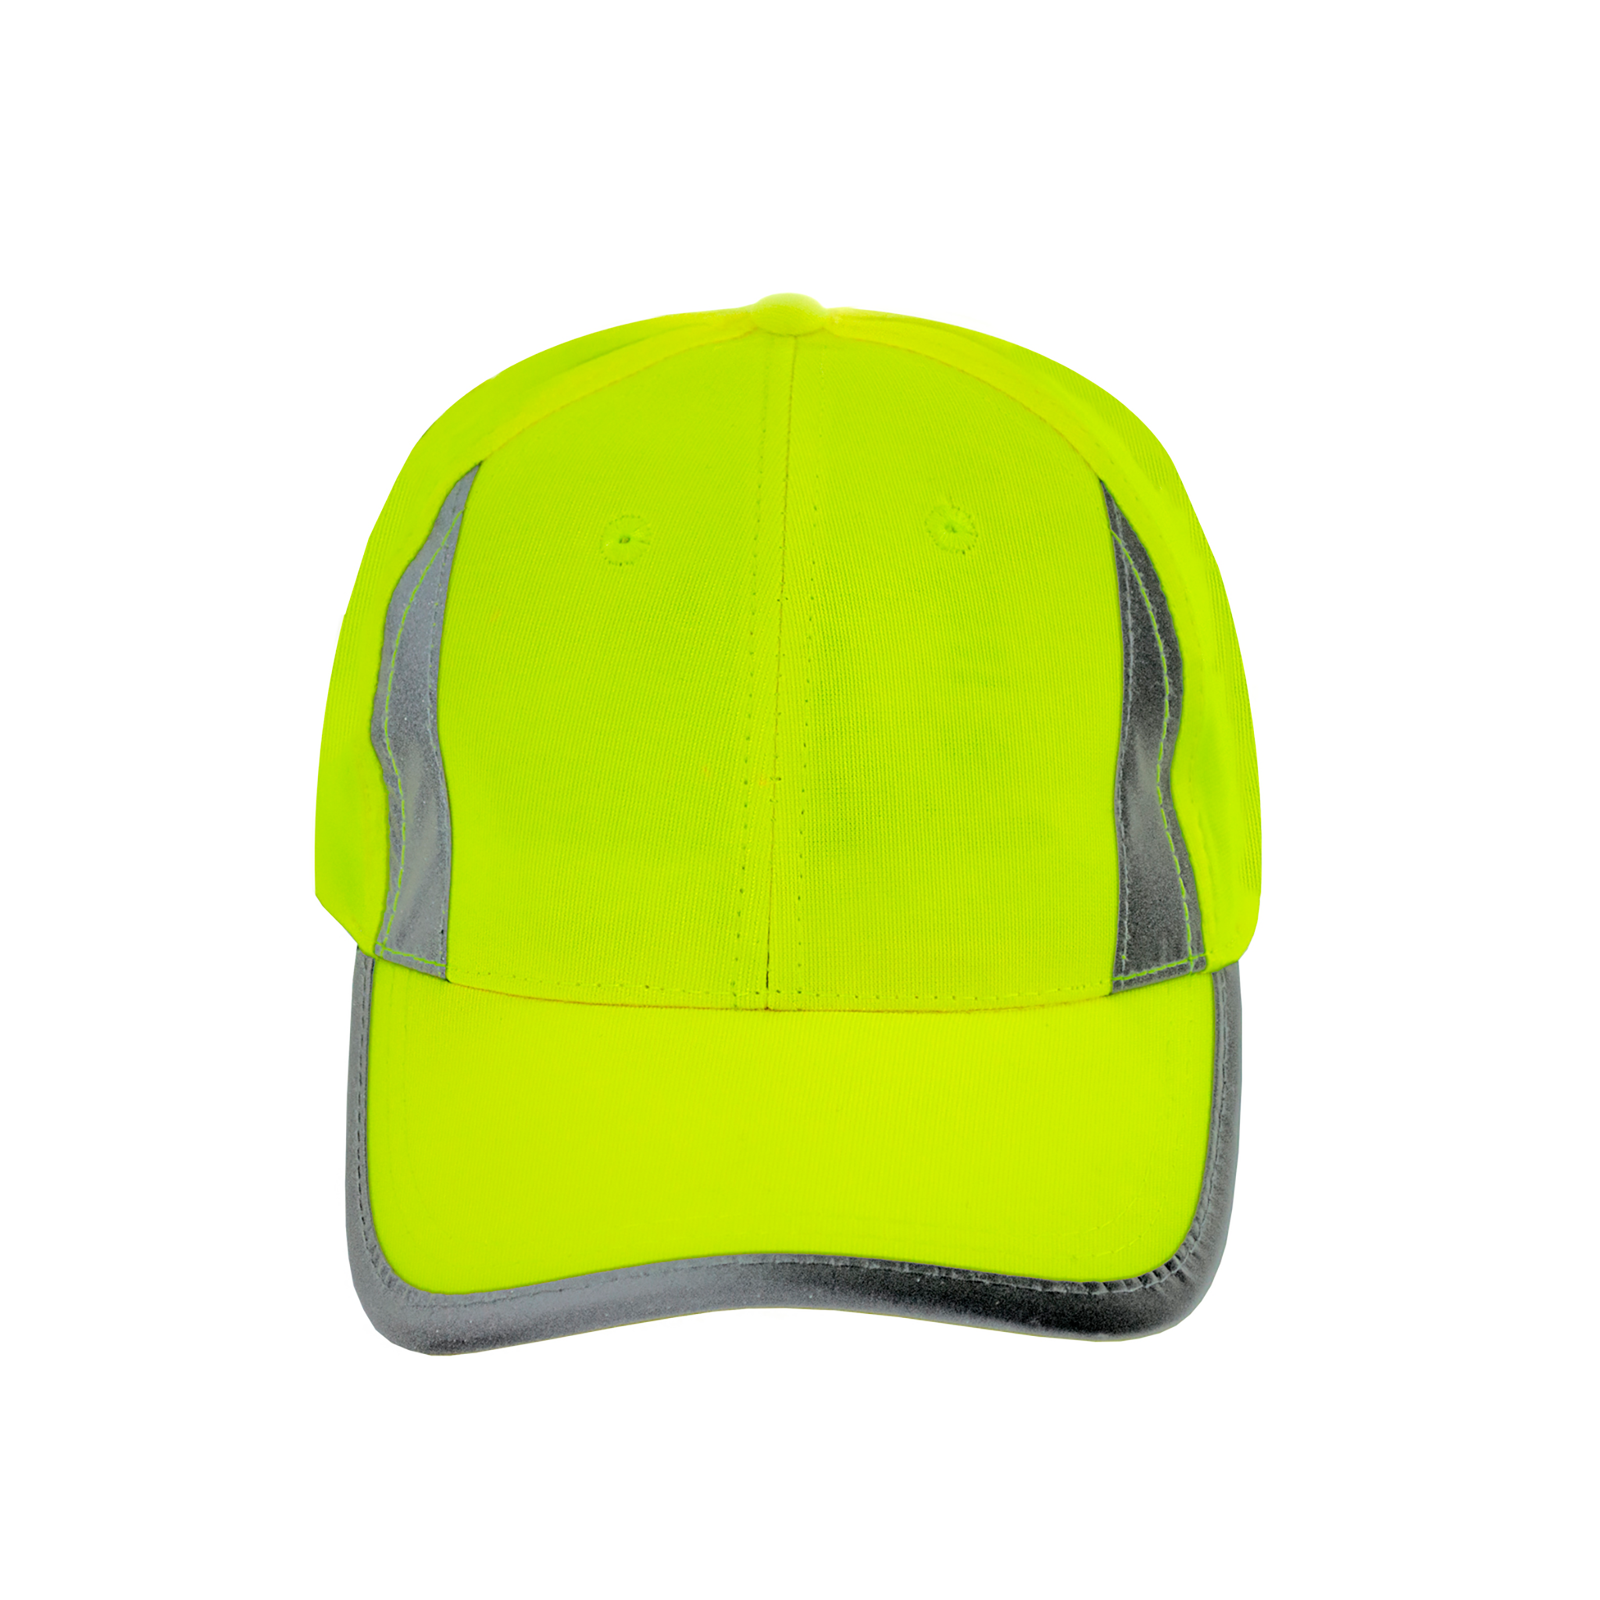 Front view of the Hi-vis lime JORESTECH safety cap with reflective stripes over white background